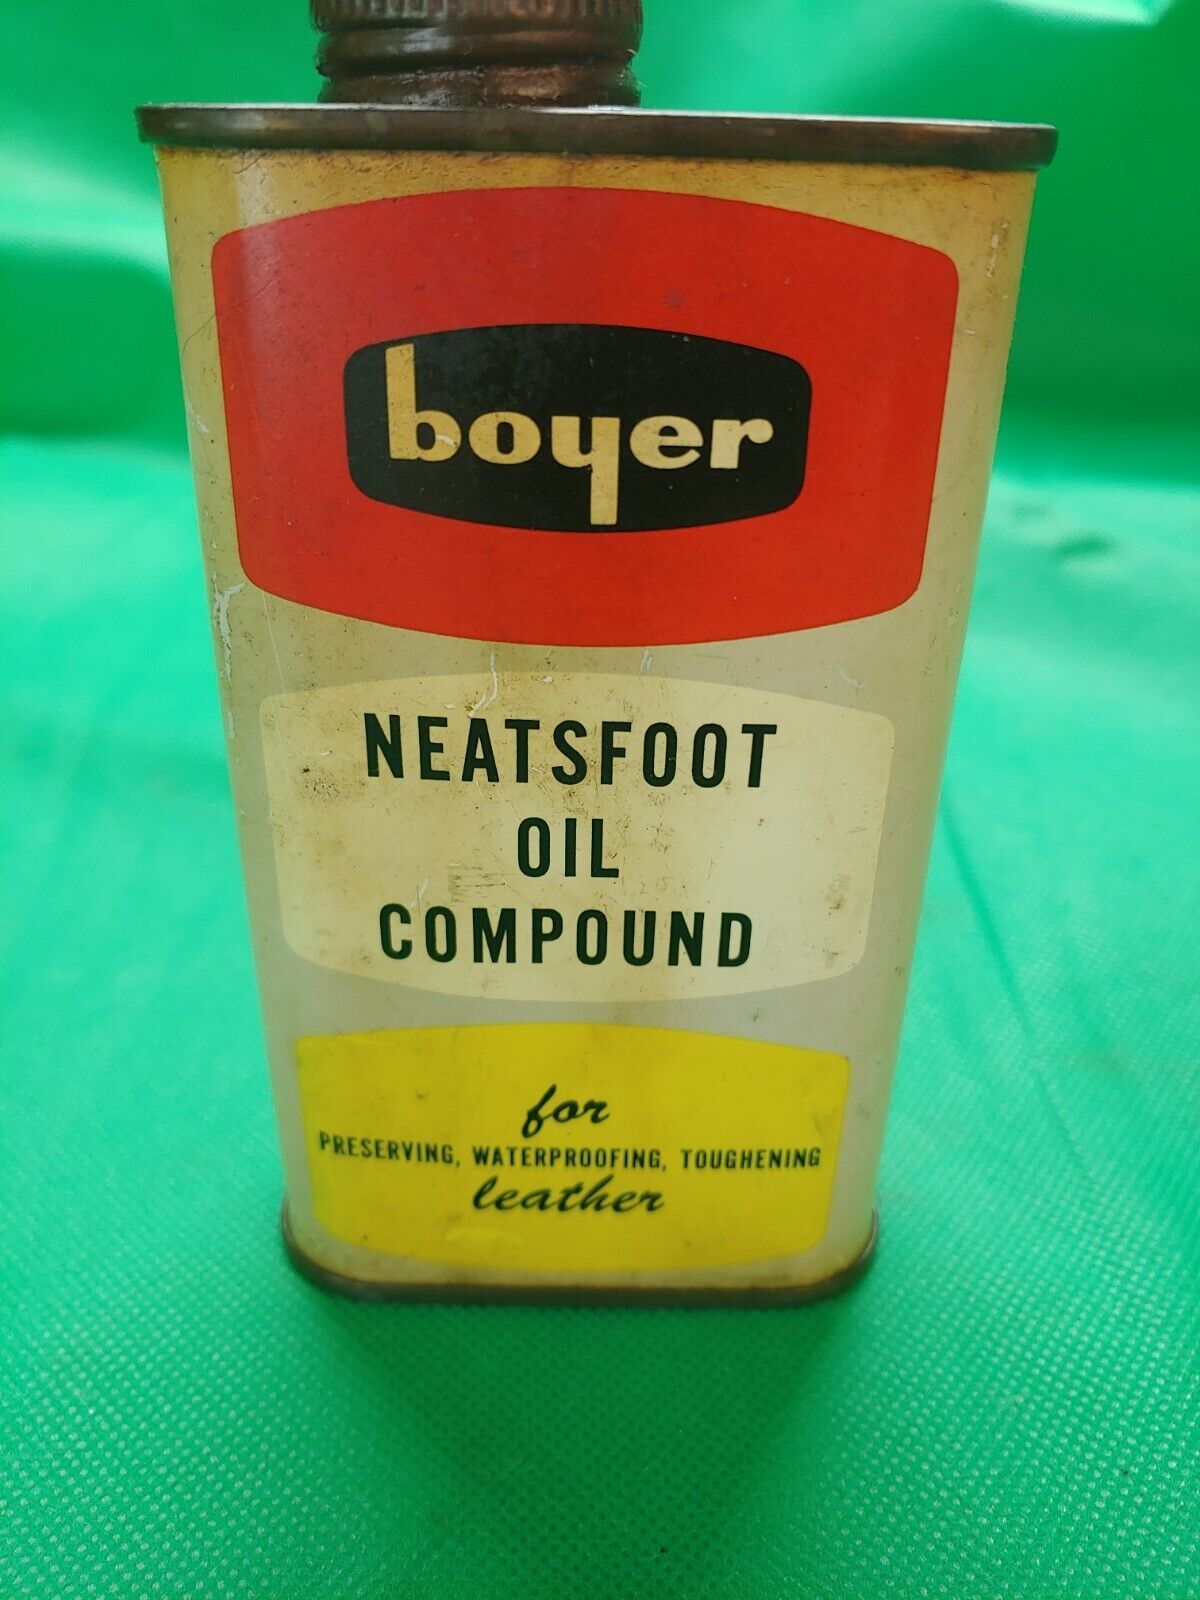 VTG Boyer Neatsfoot Oil Can Compound  Evanston IL One Half Pint. Empty